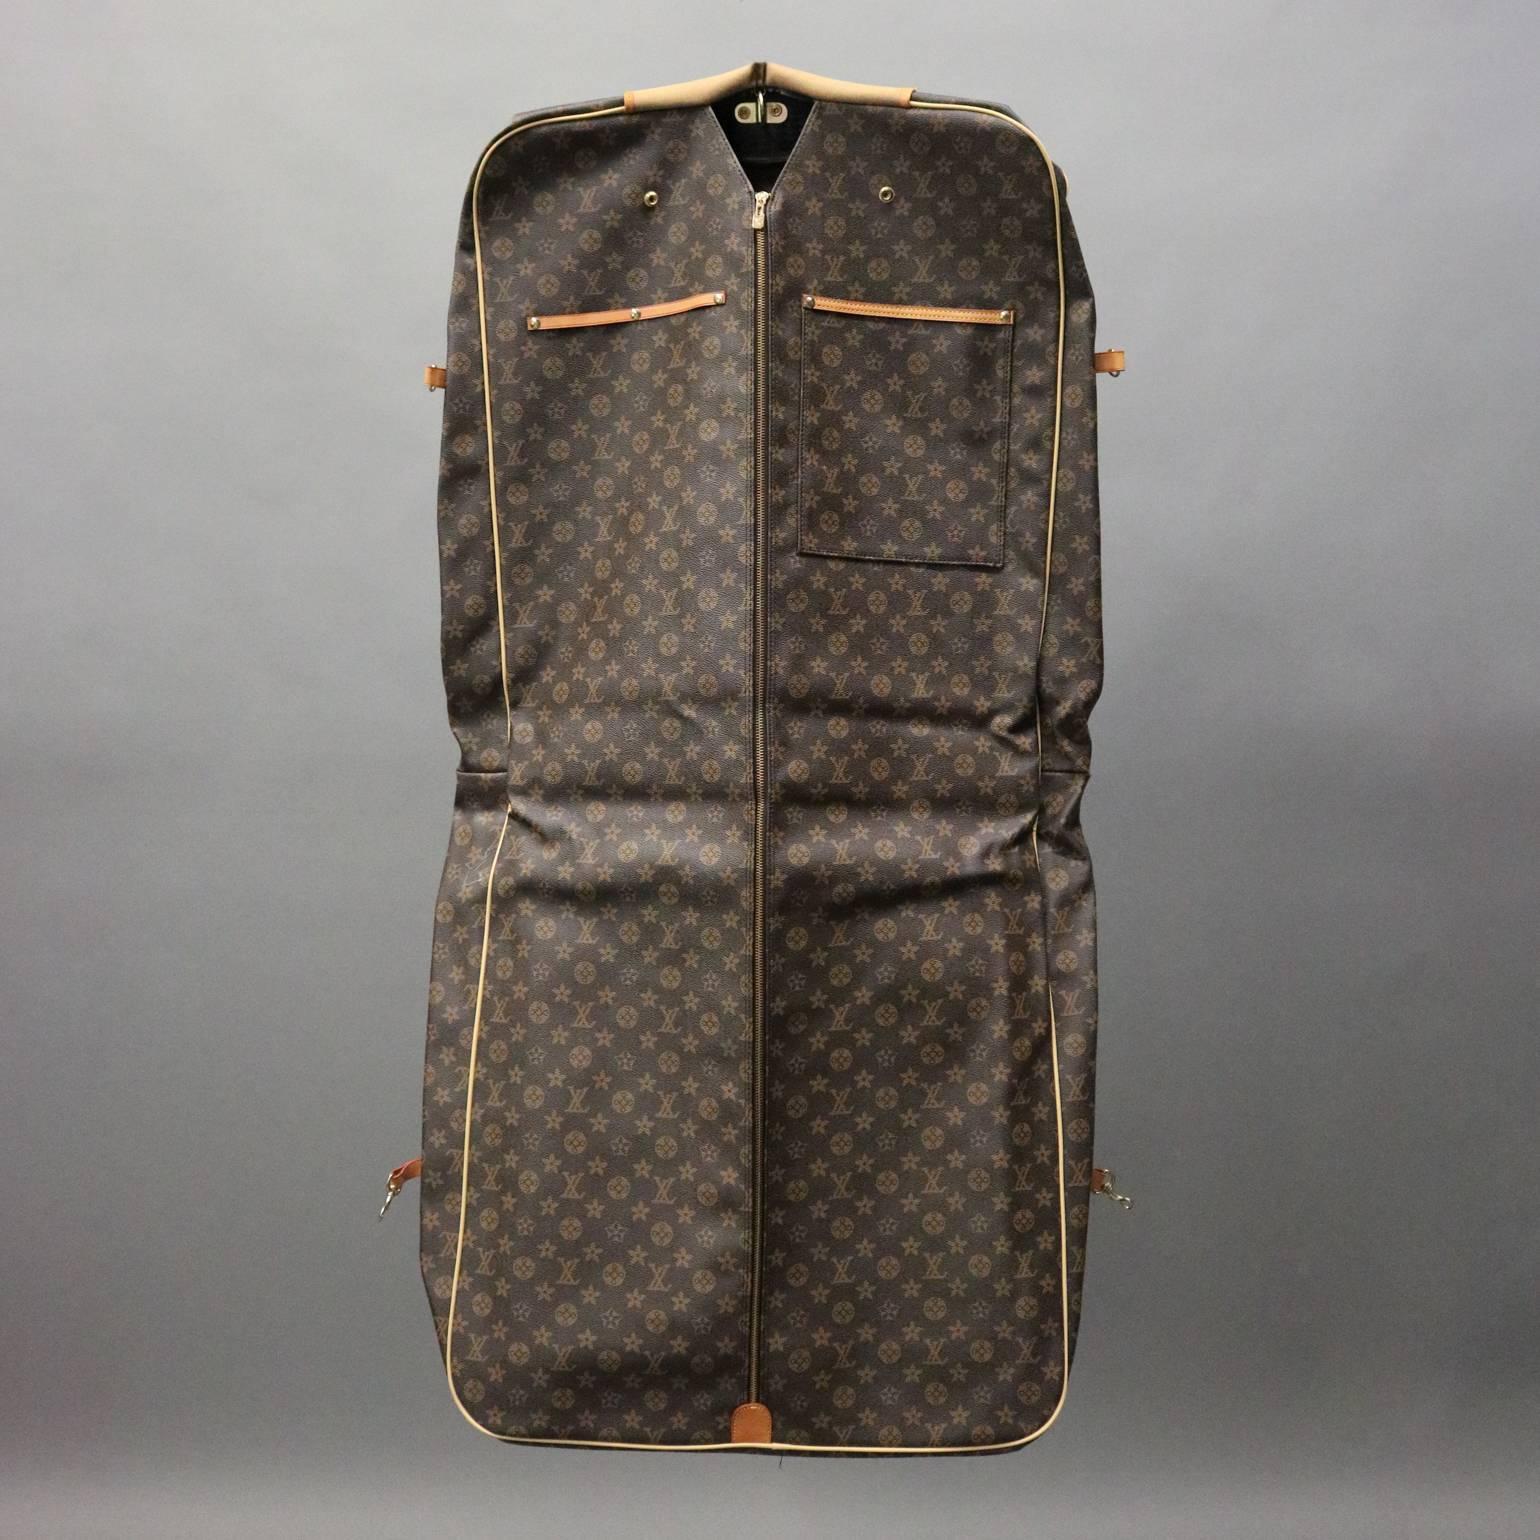 Vintage Louis Vuitton style traveling bag features quality construction with main garment compartment and additional zippered storage pouches, reminiscent of the authentic Louis Vuitton monogram canvas Portable Bandouliere Garment Bag, circa